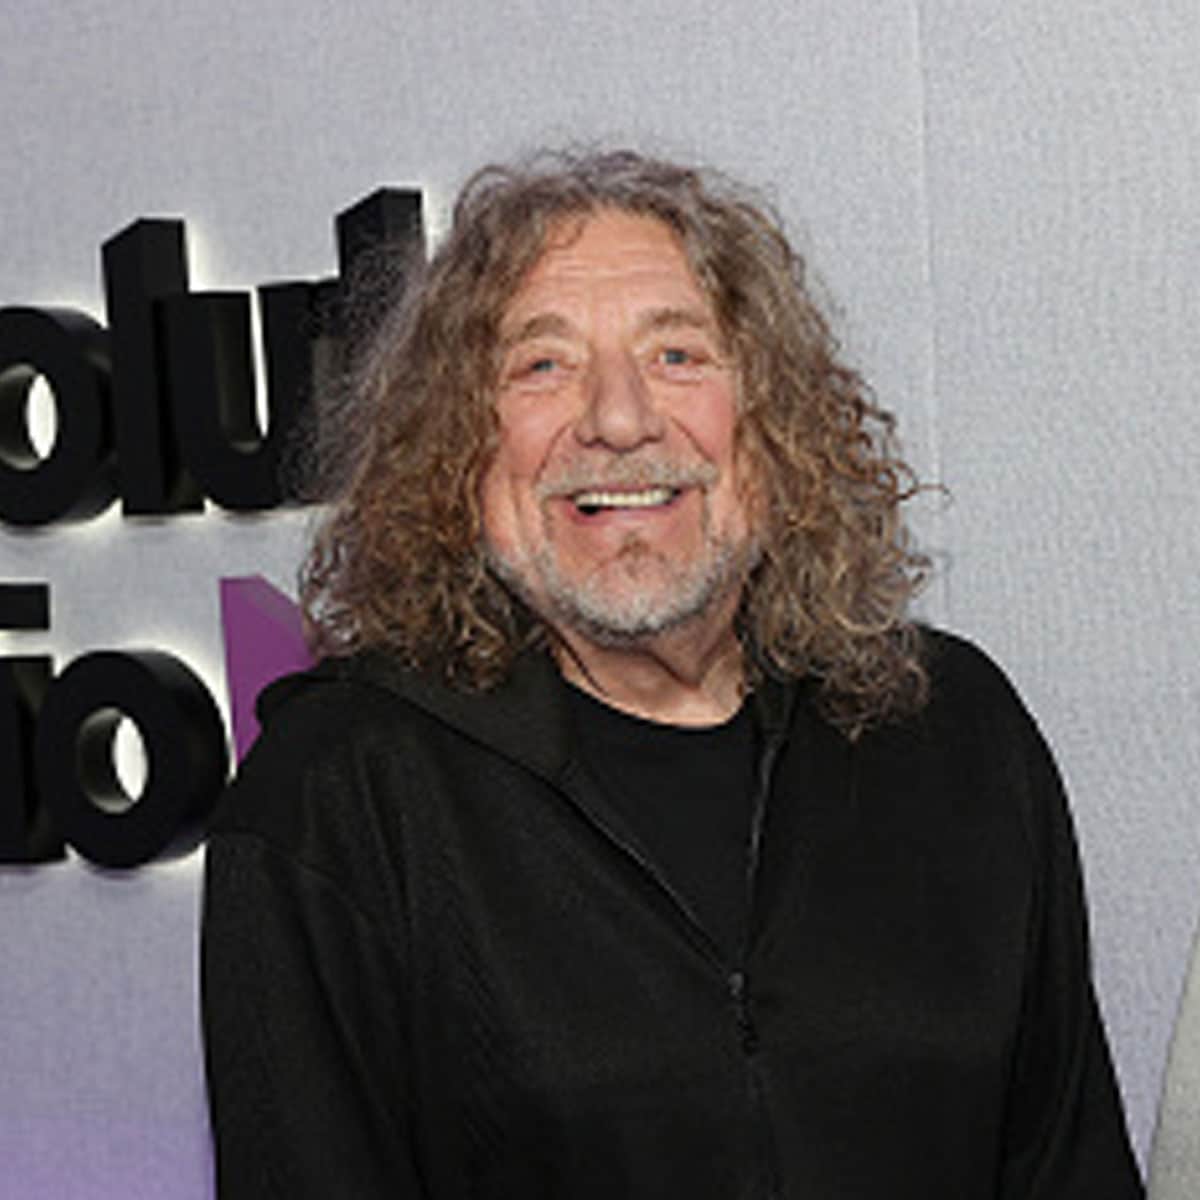 Robert Plant and presenter and singer Ben Earle (of The Shires) pose for a photograph